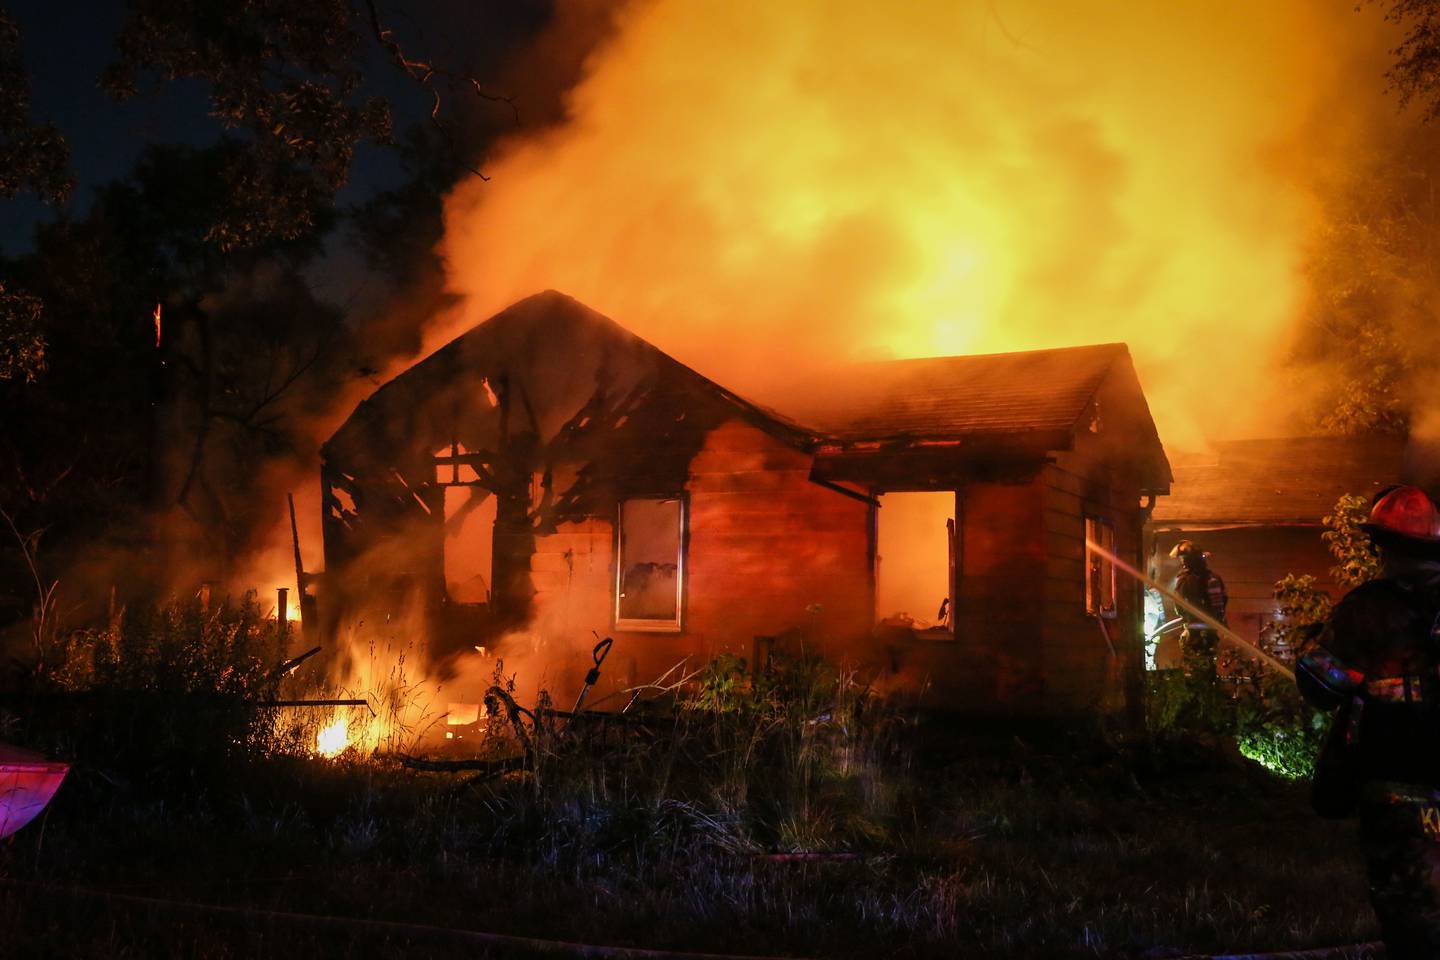 A fire in Spring Grove early Thursday morning, July 14, 2022, left one person dead and destroyed a house in the 900 block of Main Street Road.